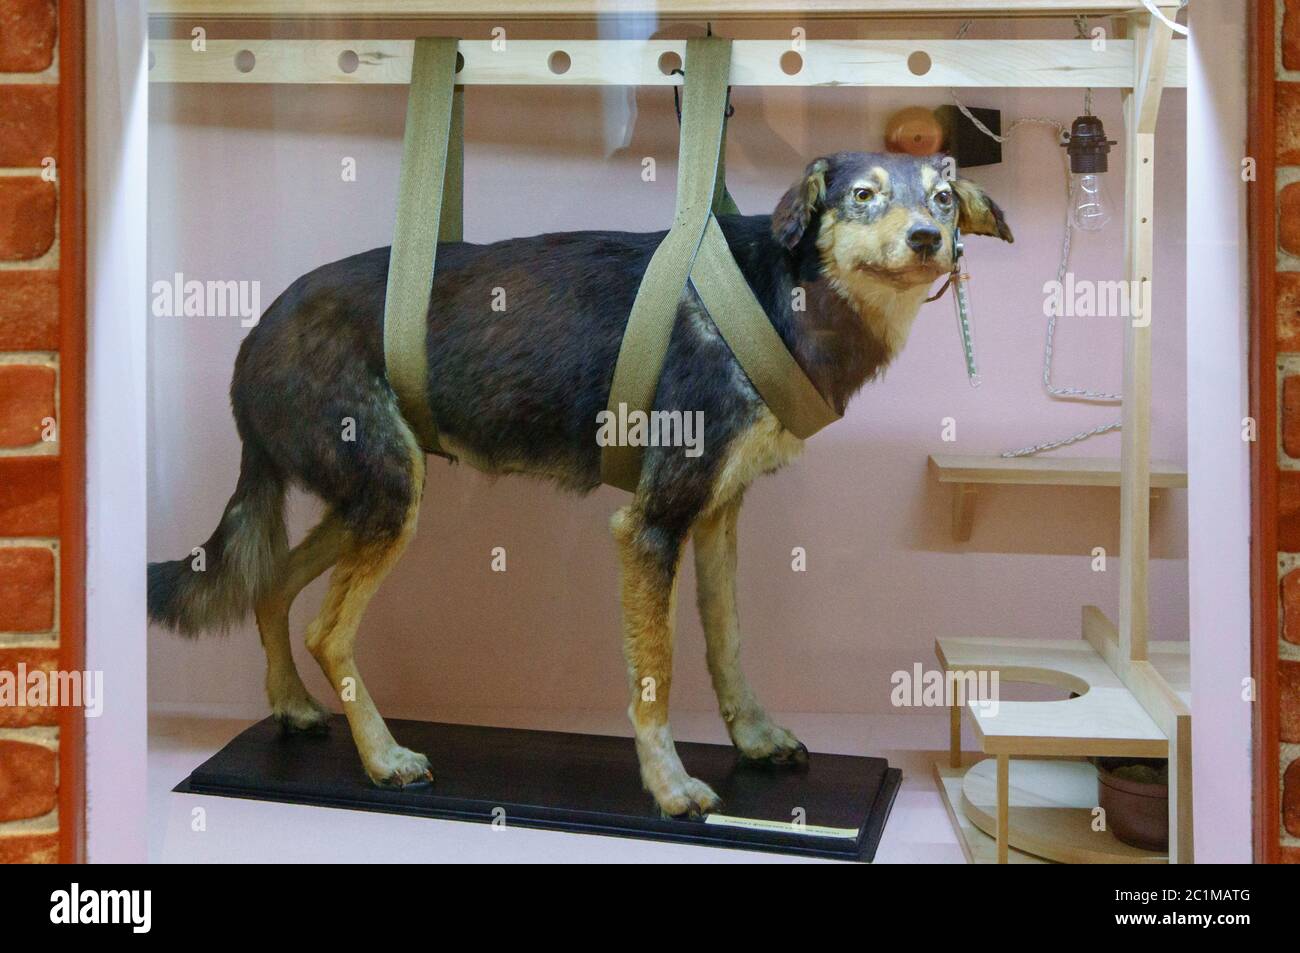 Ryazan, Russia - August 19, 2018: Stuffed dogs in Pavlov museum. Pavlov's experiments with dogs demonstrated that our behavior c Stock Photo